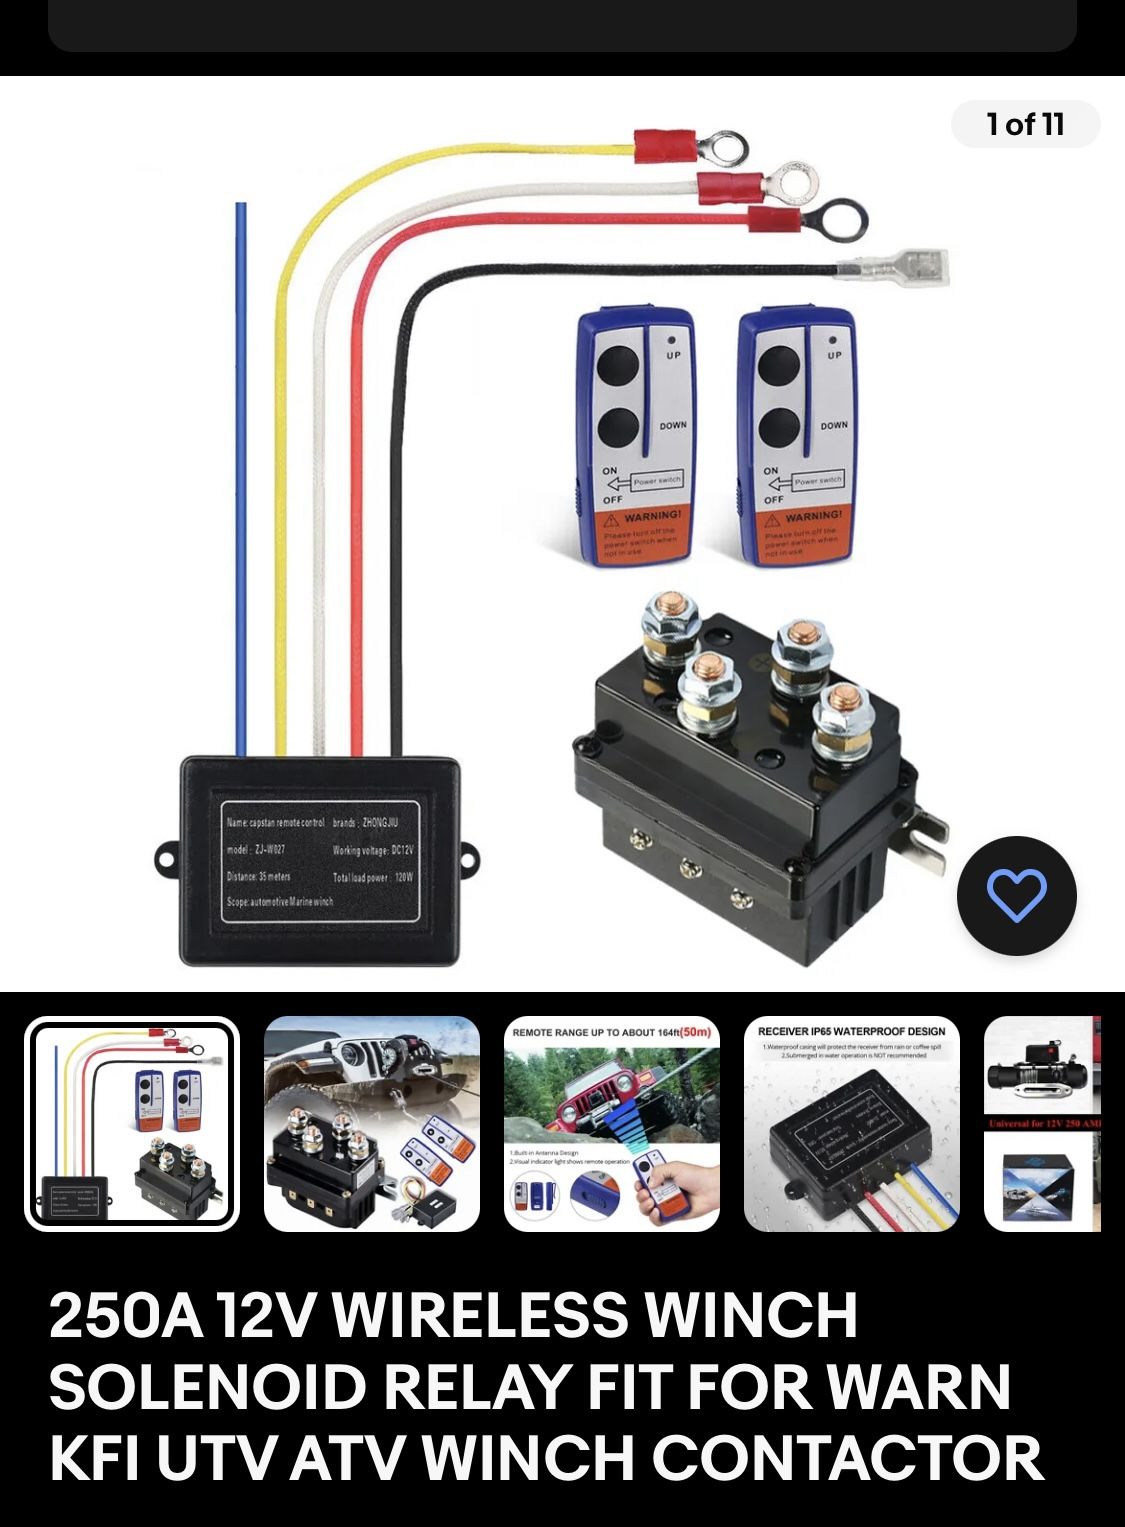 250A 12V WIRELESS WINCH SOLENOID RELAY